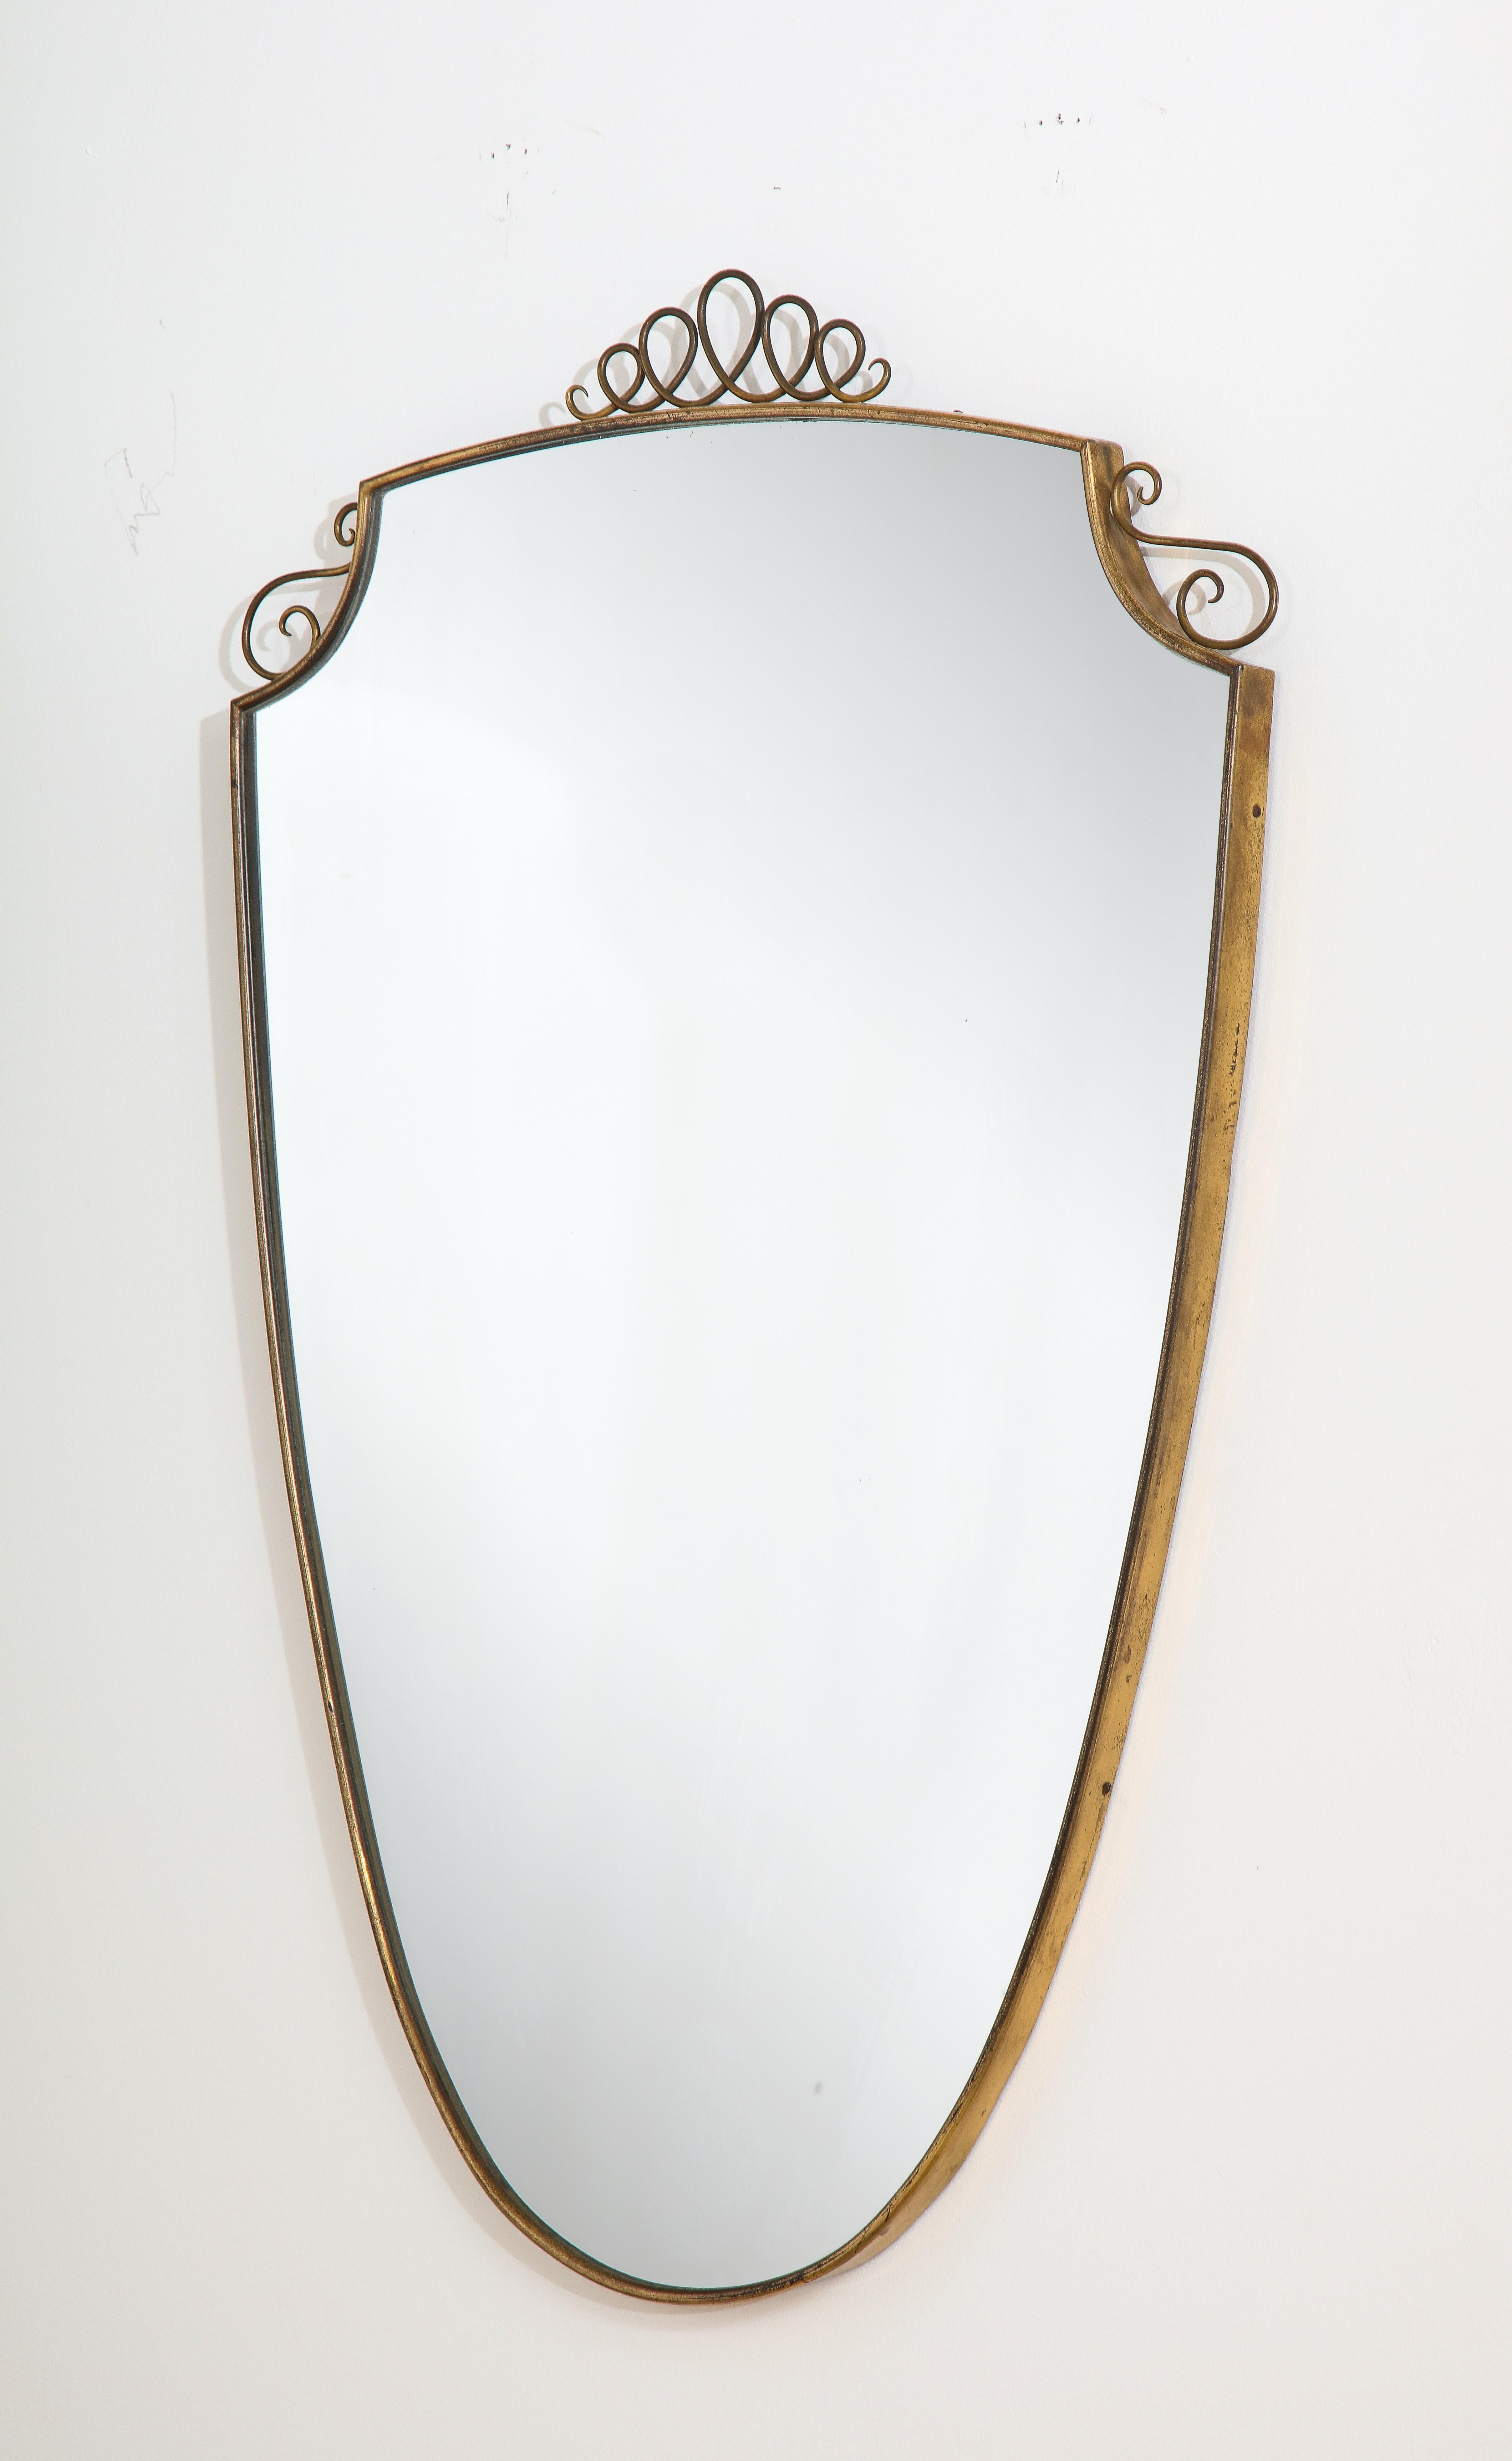 An elegant Gio Ponti brass shield shaped mirror with curly decorative motif surmounted on the crest and on each side. Ponti designed similar mirrors with the same decorative brass wave motif, in 1950, for the Hotel Bristol in Murano. With its